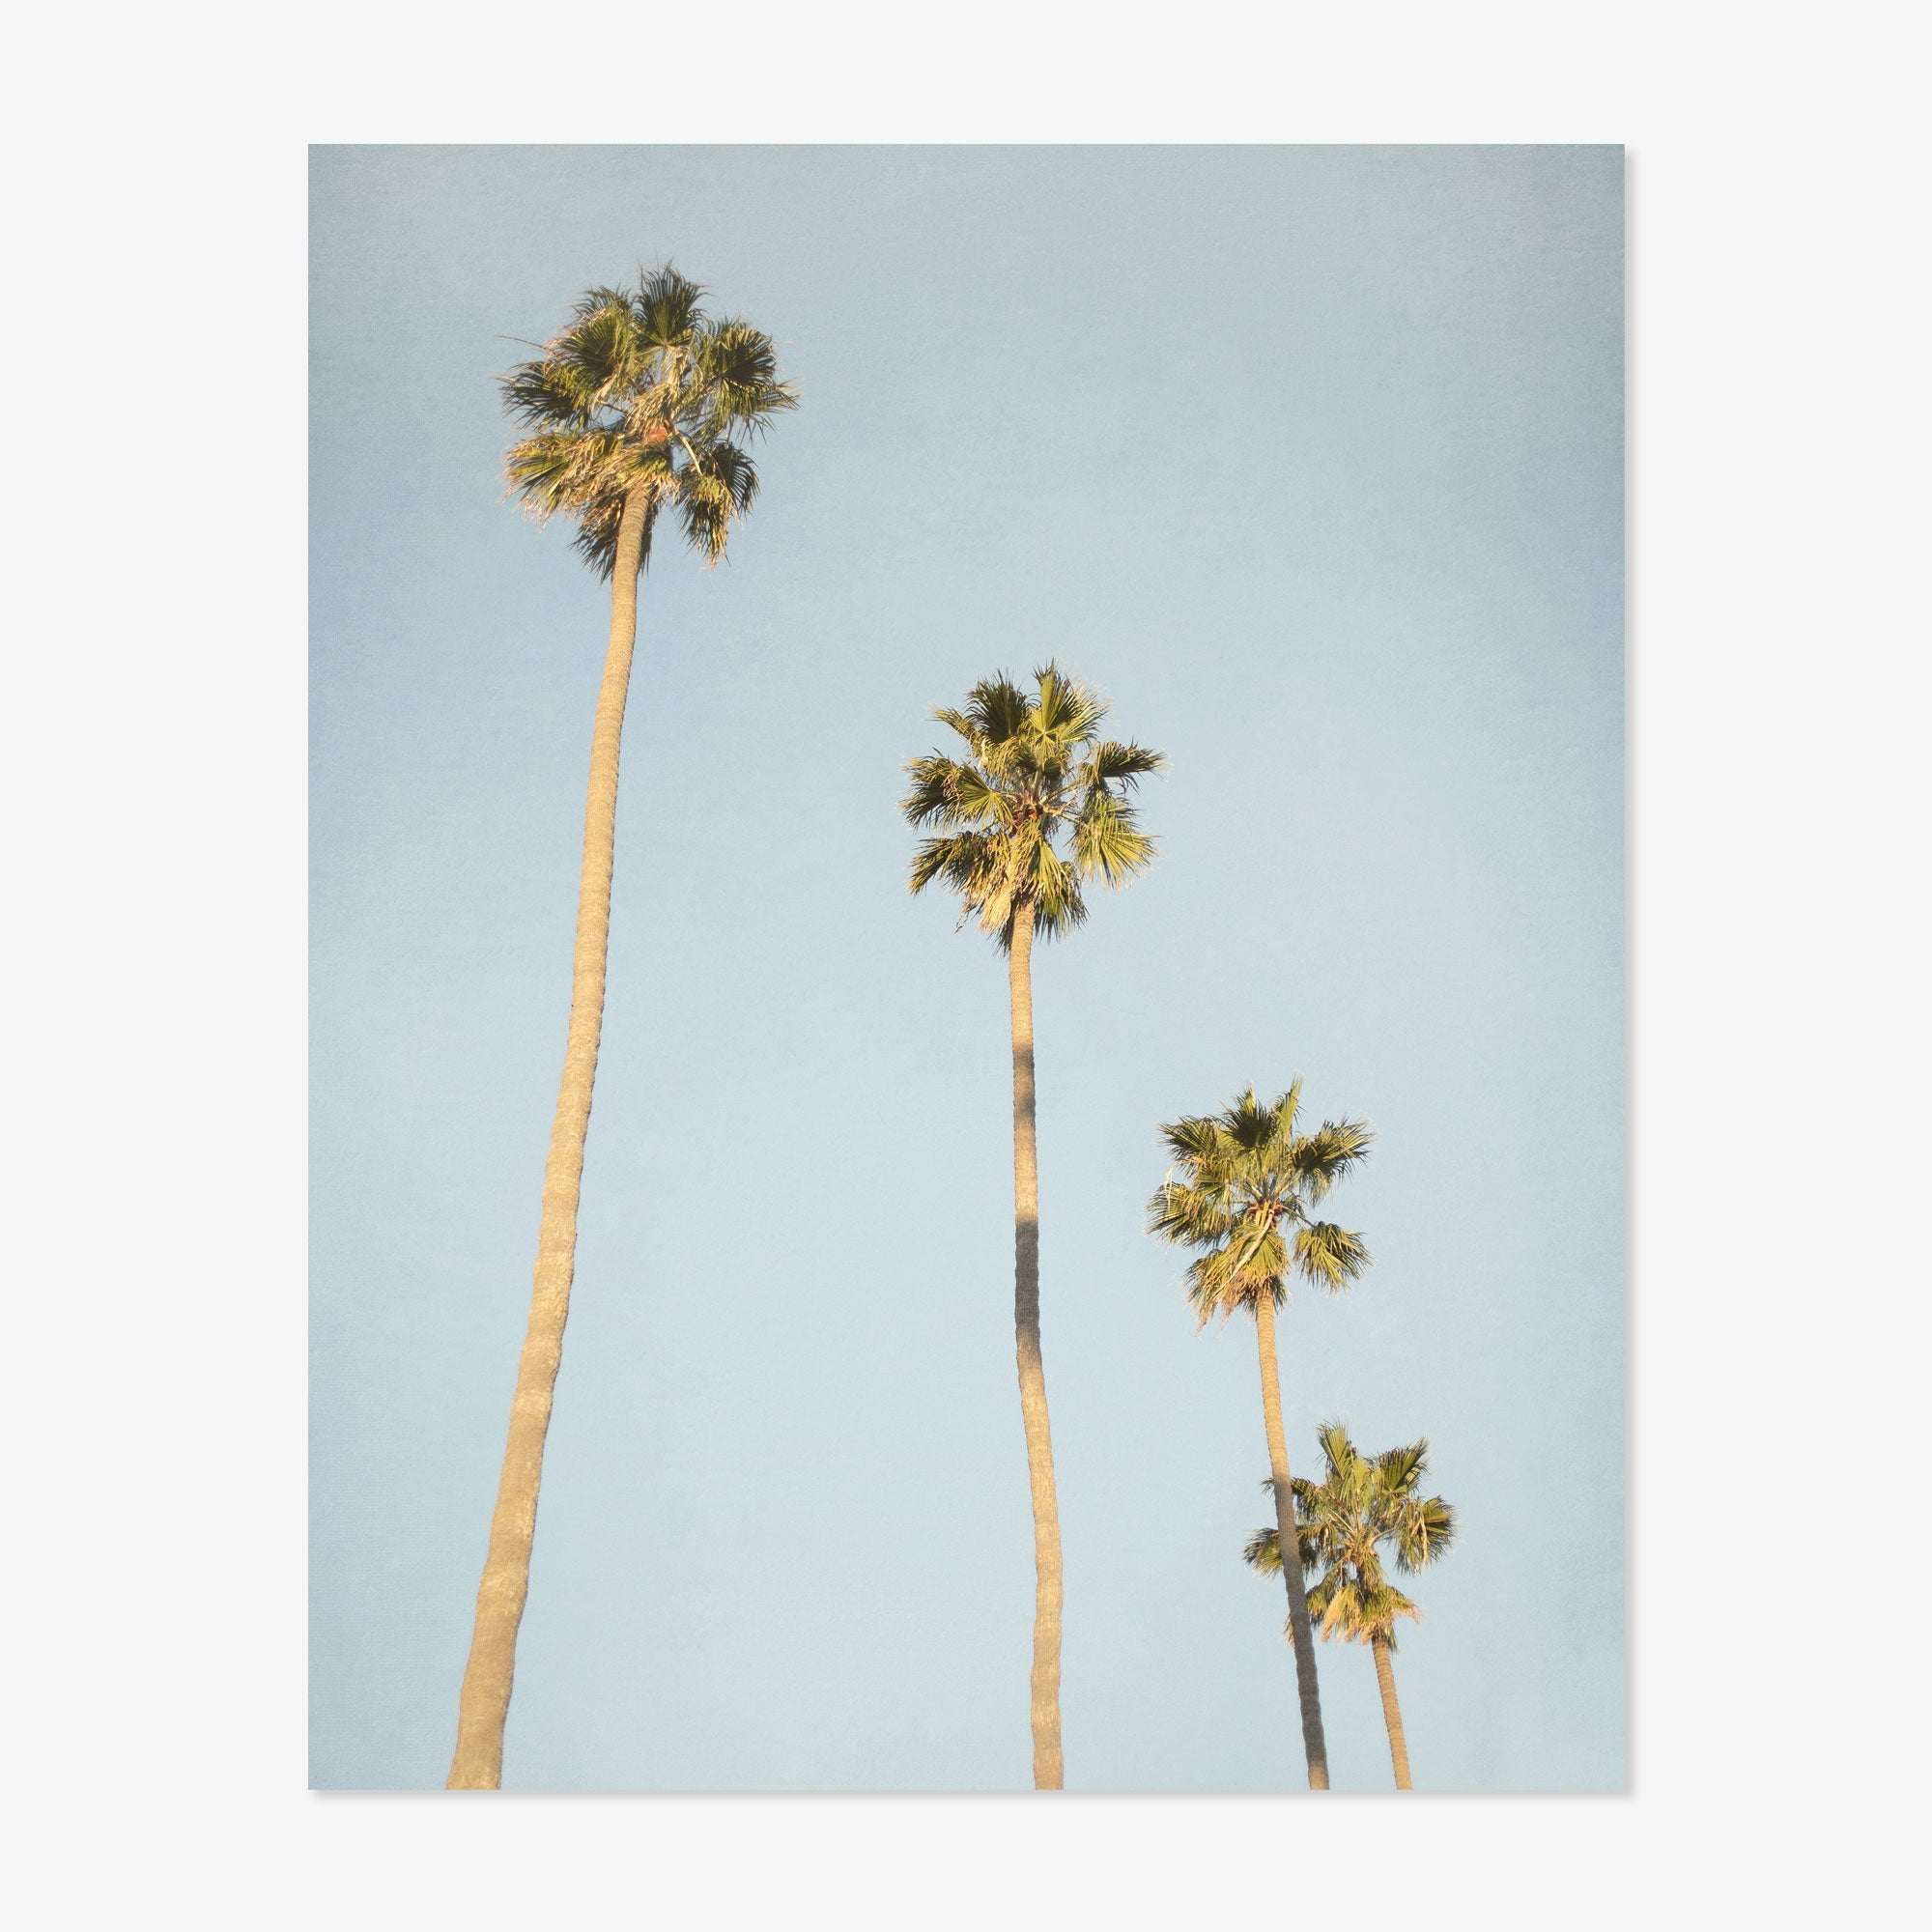 Three tall Los Angeles Palm Tree Photographic Prints &#39;Palm Stairs to Heaven&#39; from Offley Green with thin trunks and bushy tops stand against a clear California sky.